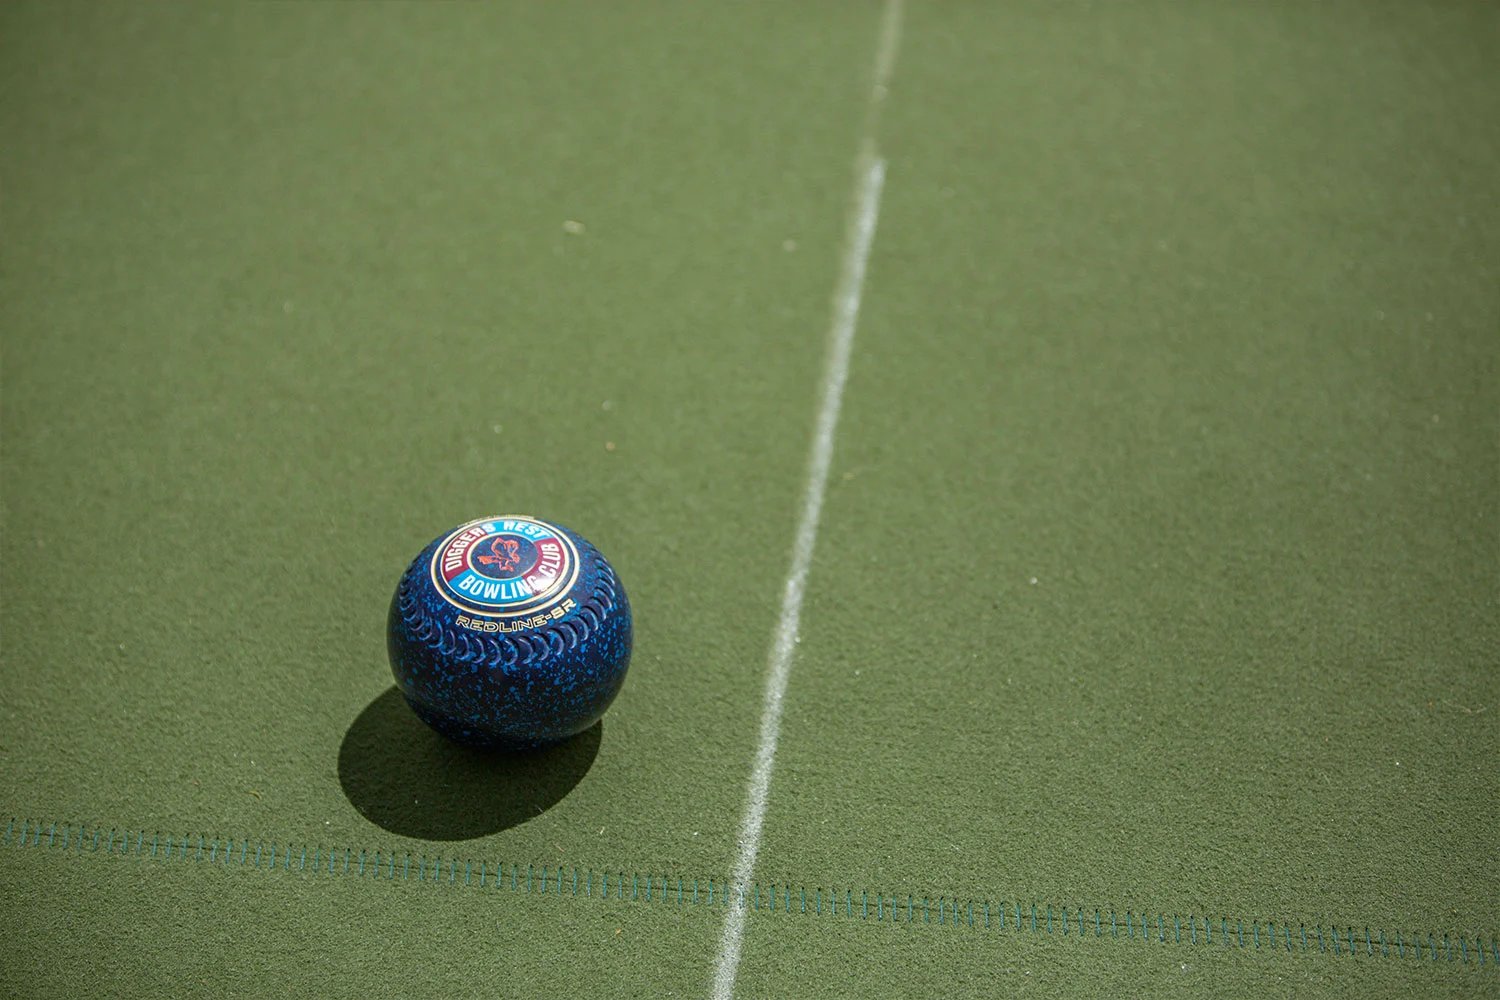 Close up of a lawn bowl on a synthetic turf surface with white line marking